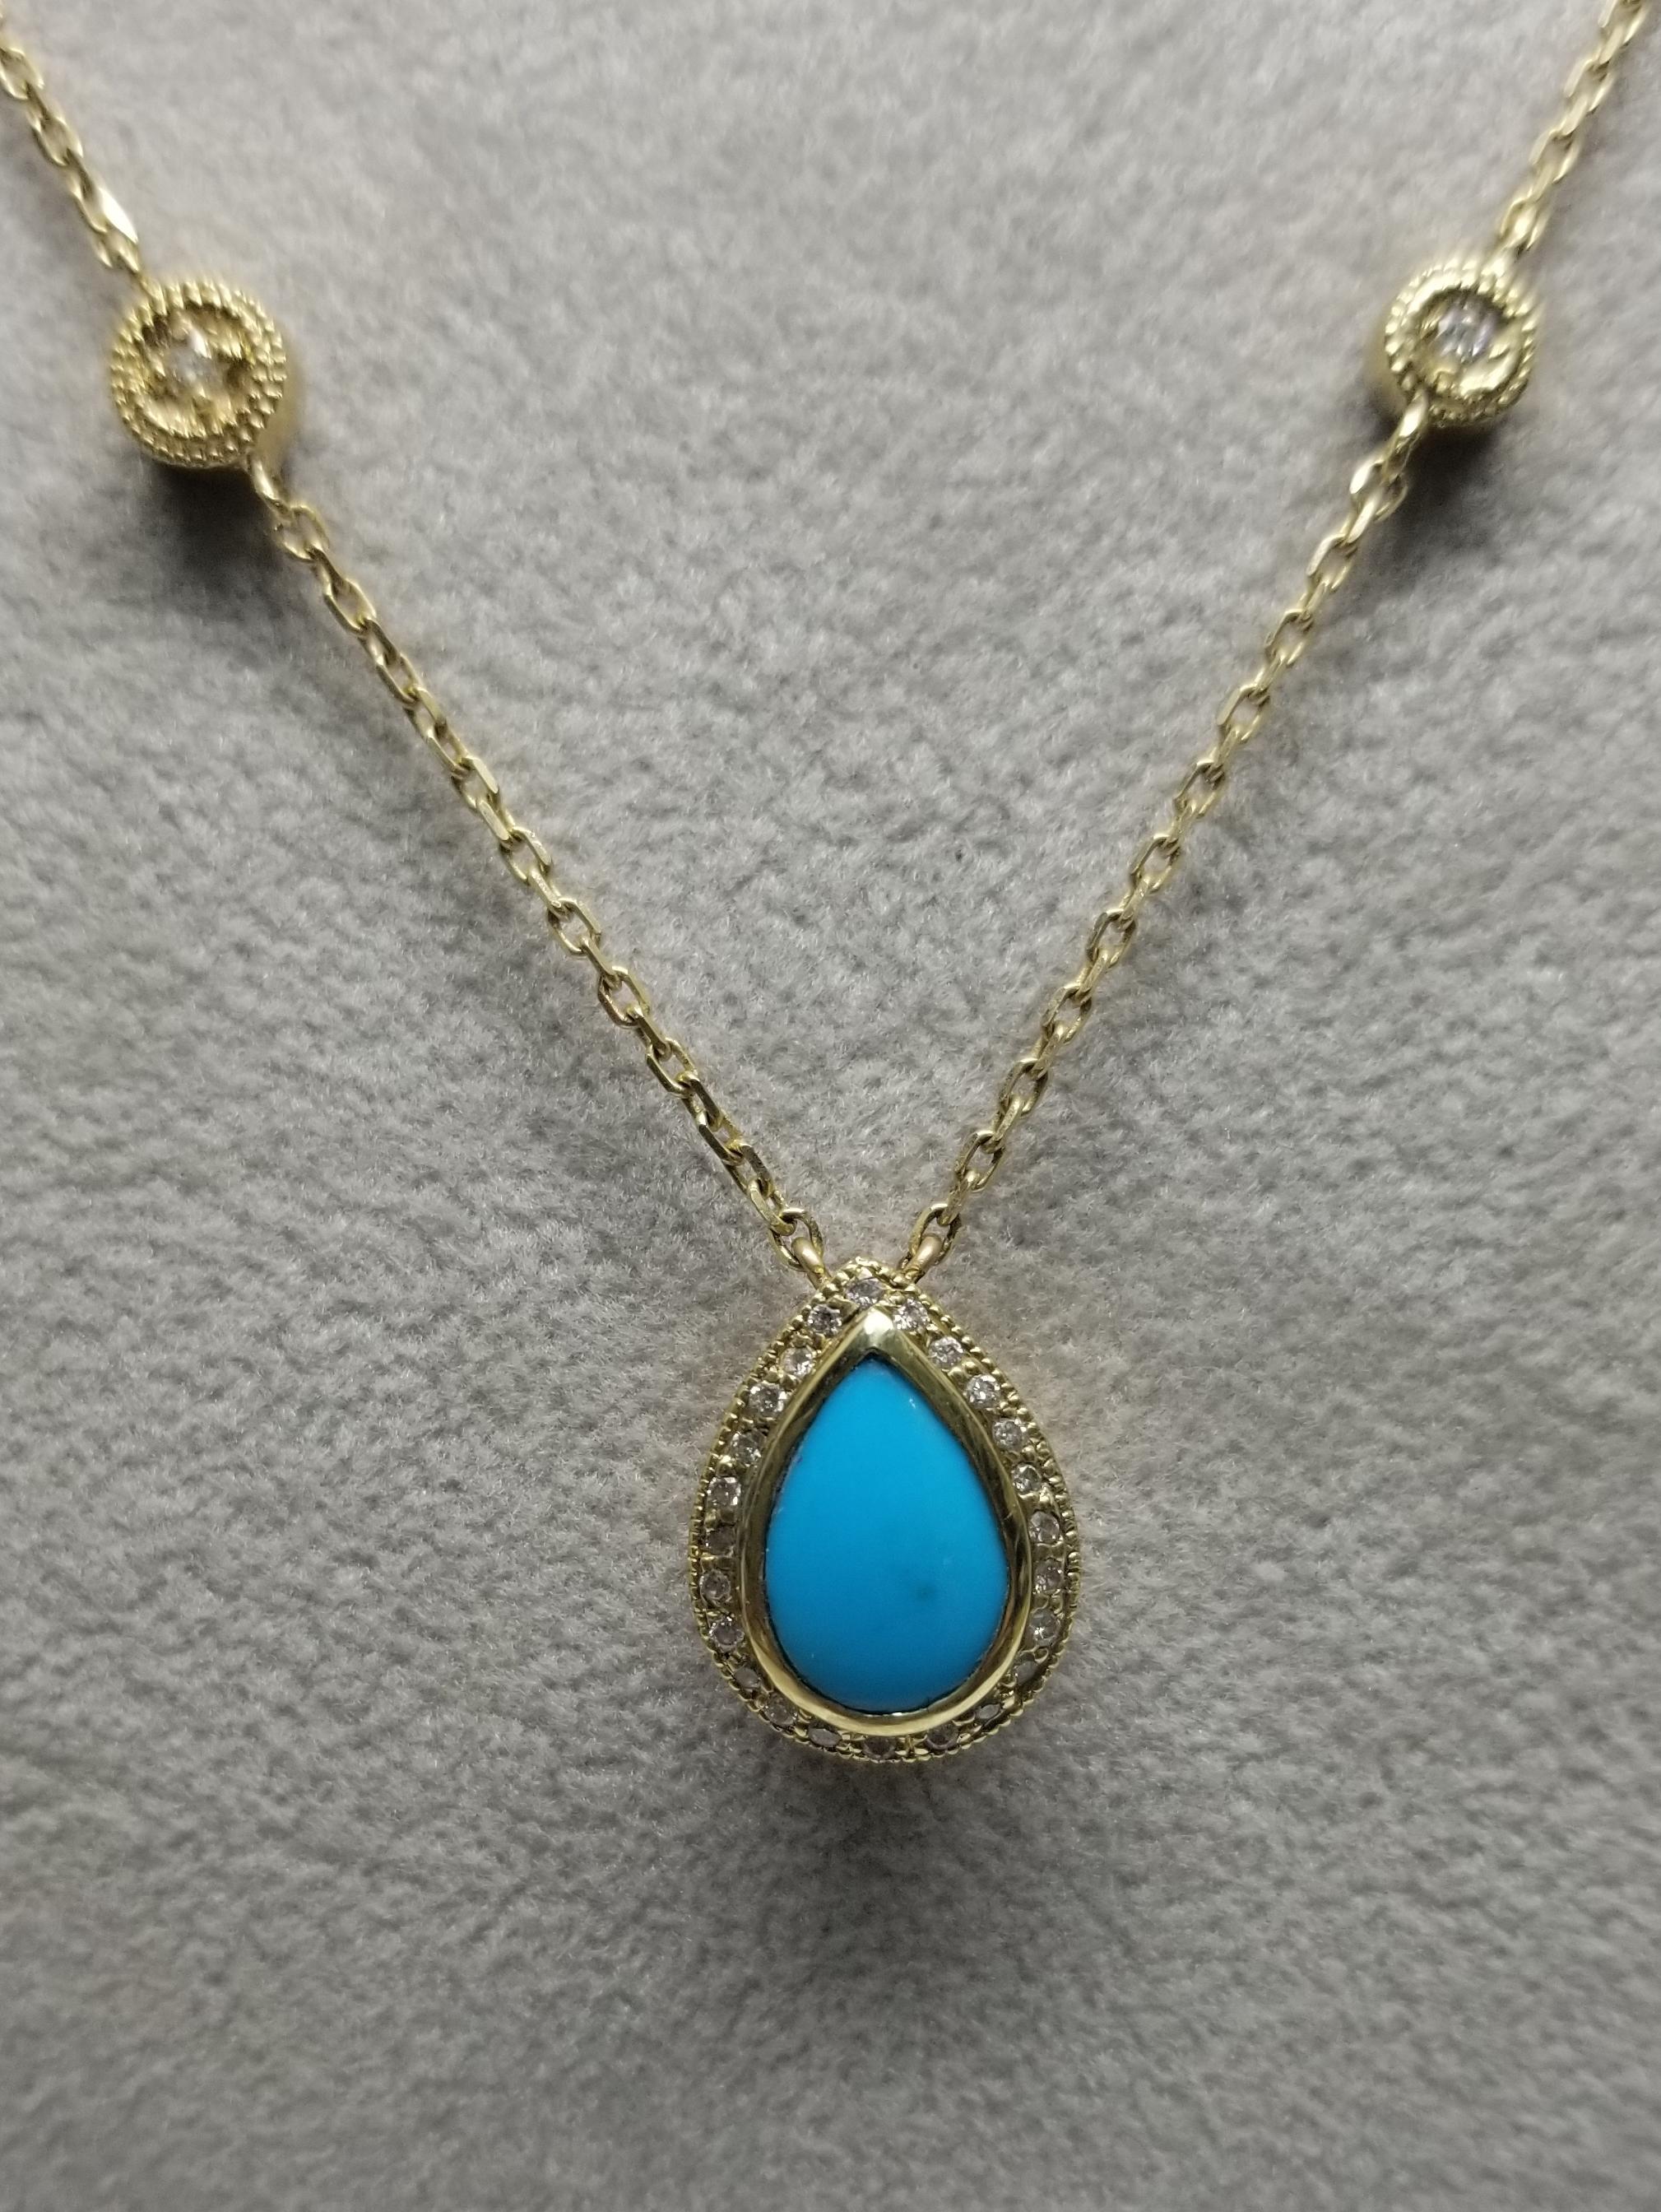 14K Yellow gold turquoise and diamond halo necklace, containing  1 turquoise 1.95cts. pear shape and 41 round full cut diamonds of very fine quality weighing .90pts. the diamonds accents on the chain are 2 sided at 18.5 inches.